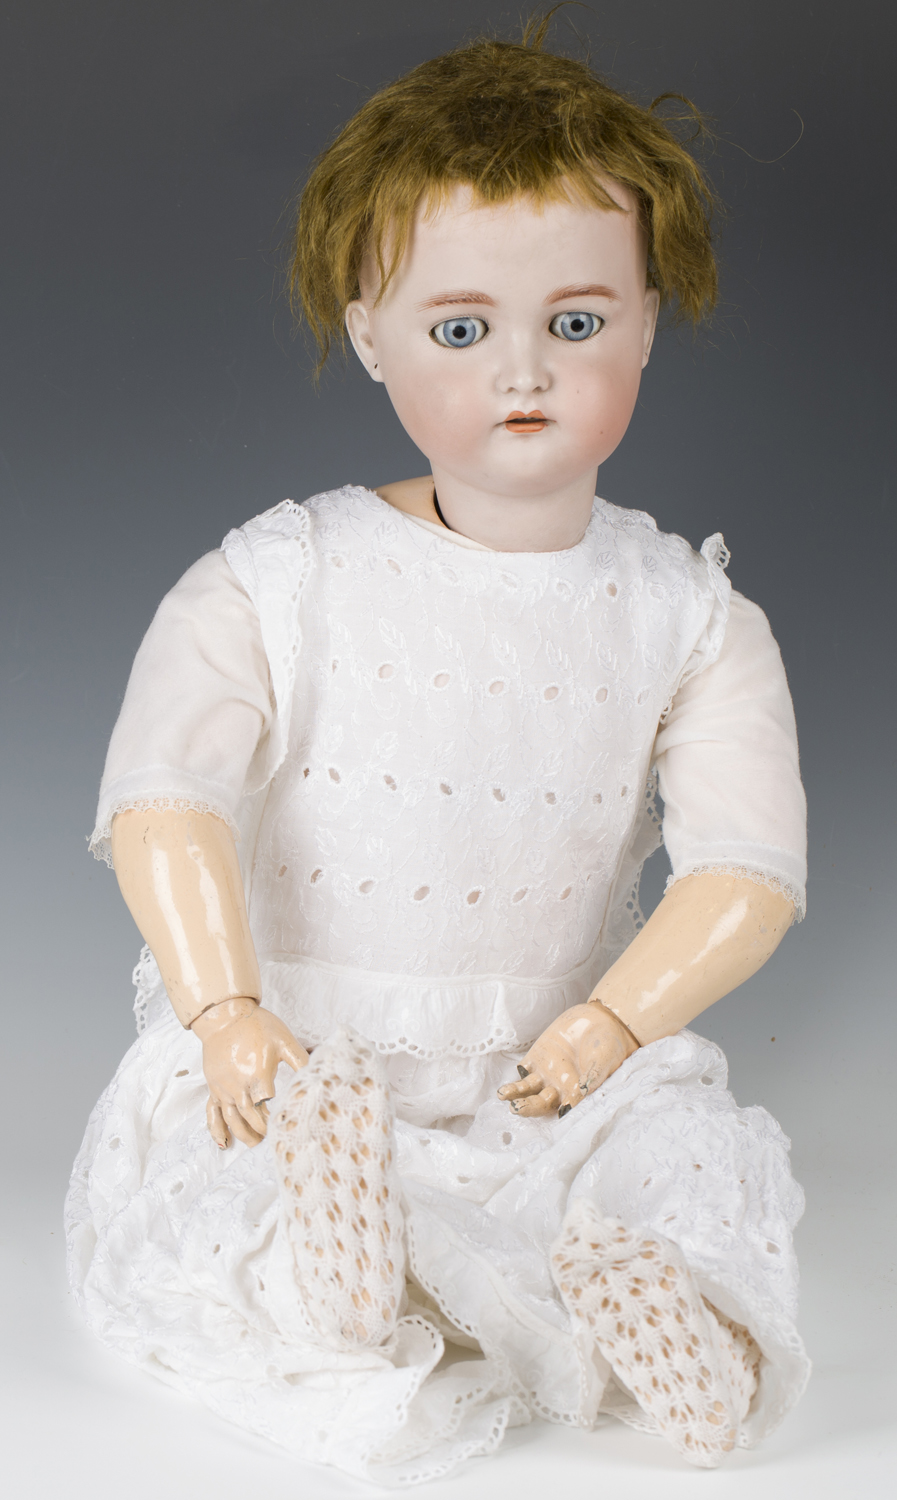 A Simon & Halbig K&R bisque head doll, impressed '80', with brown wig, pierced ears, sleeping blue